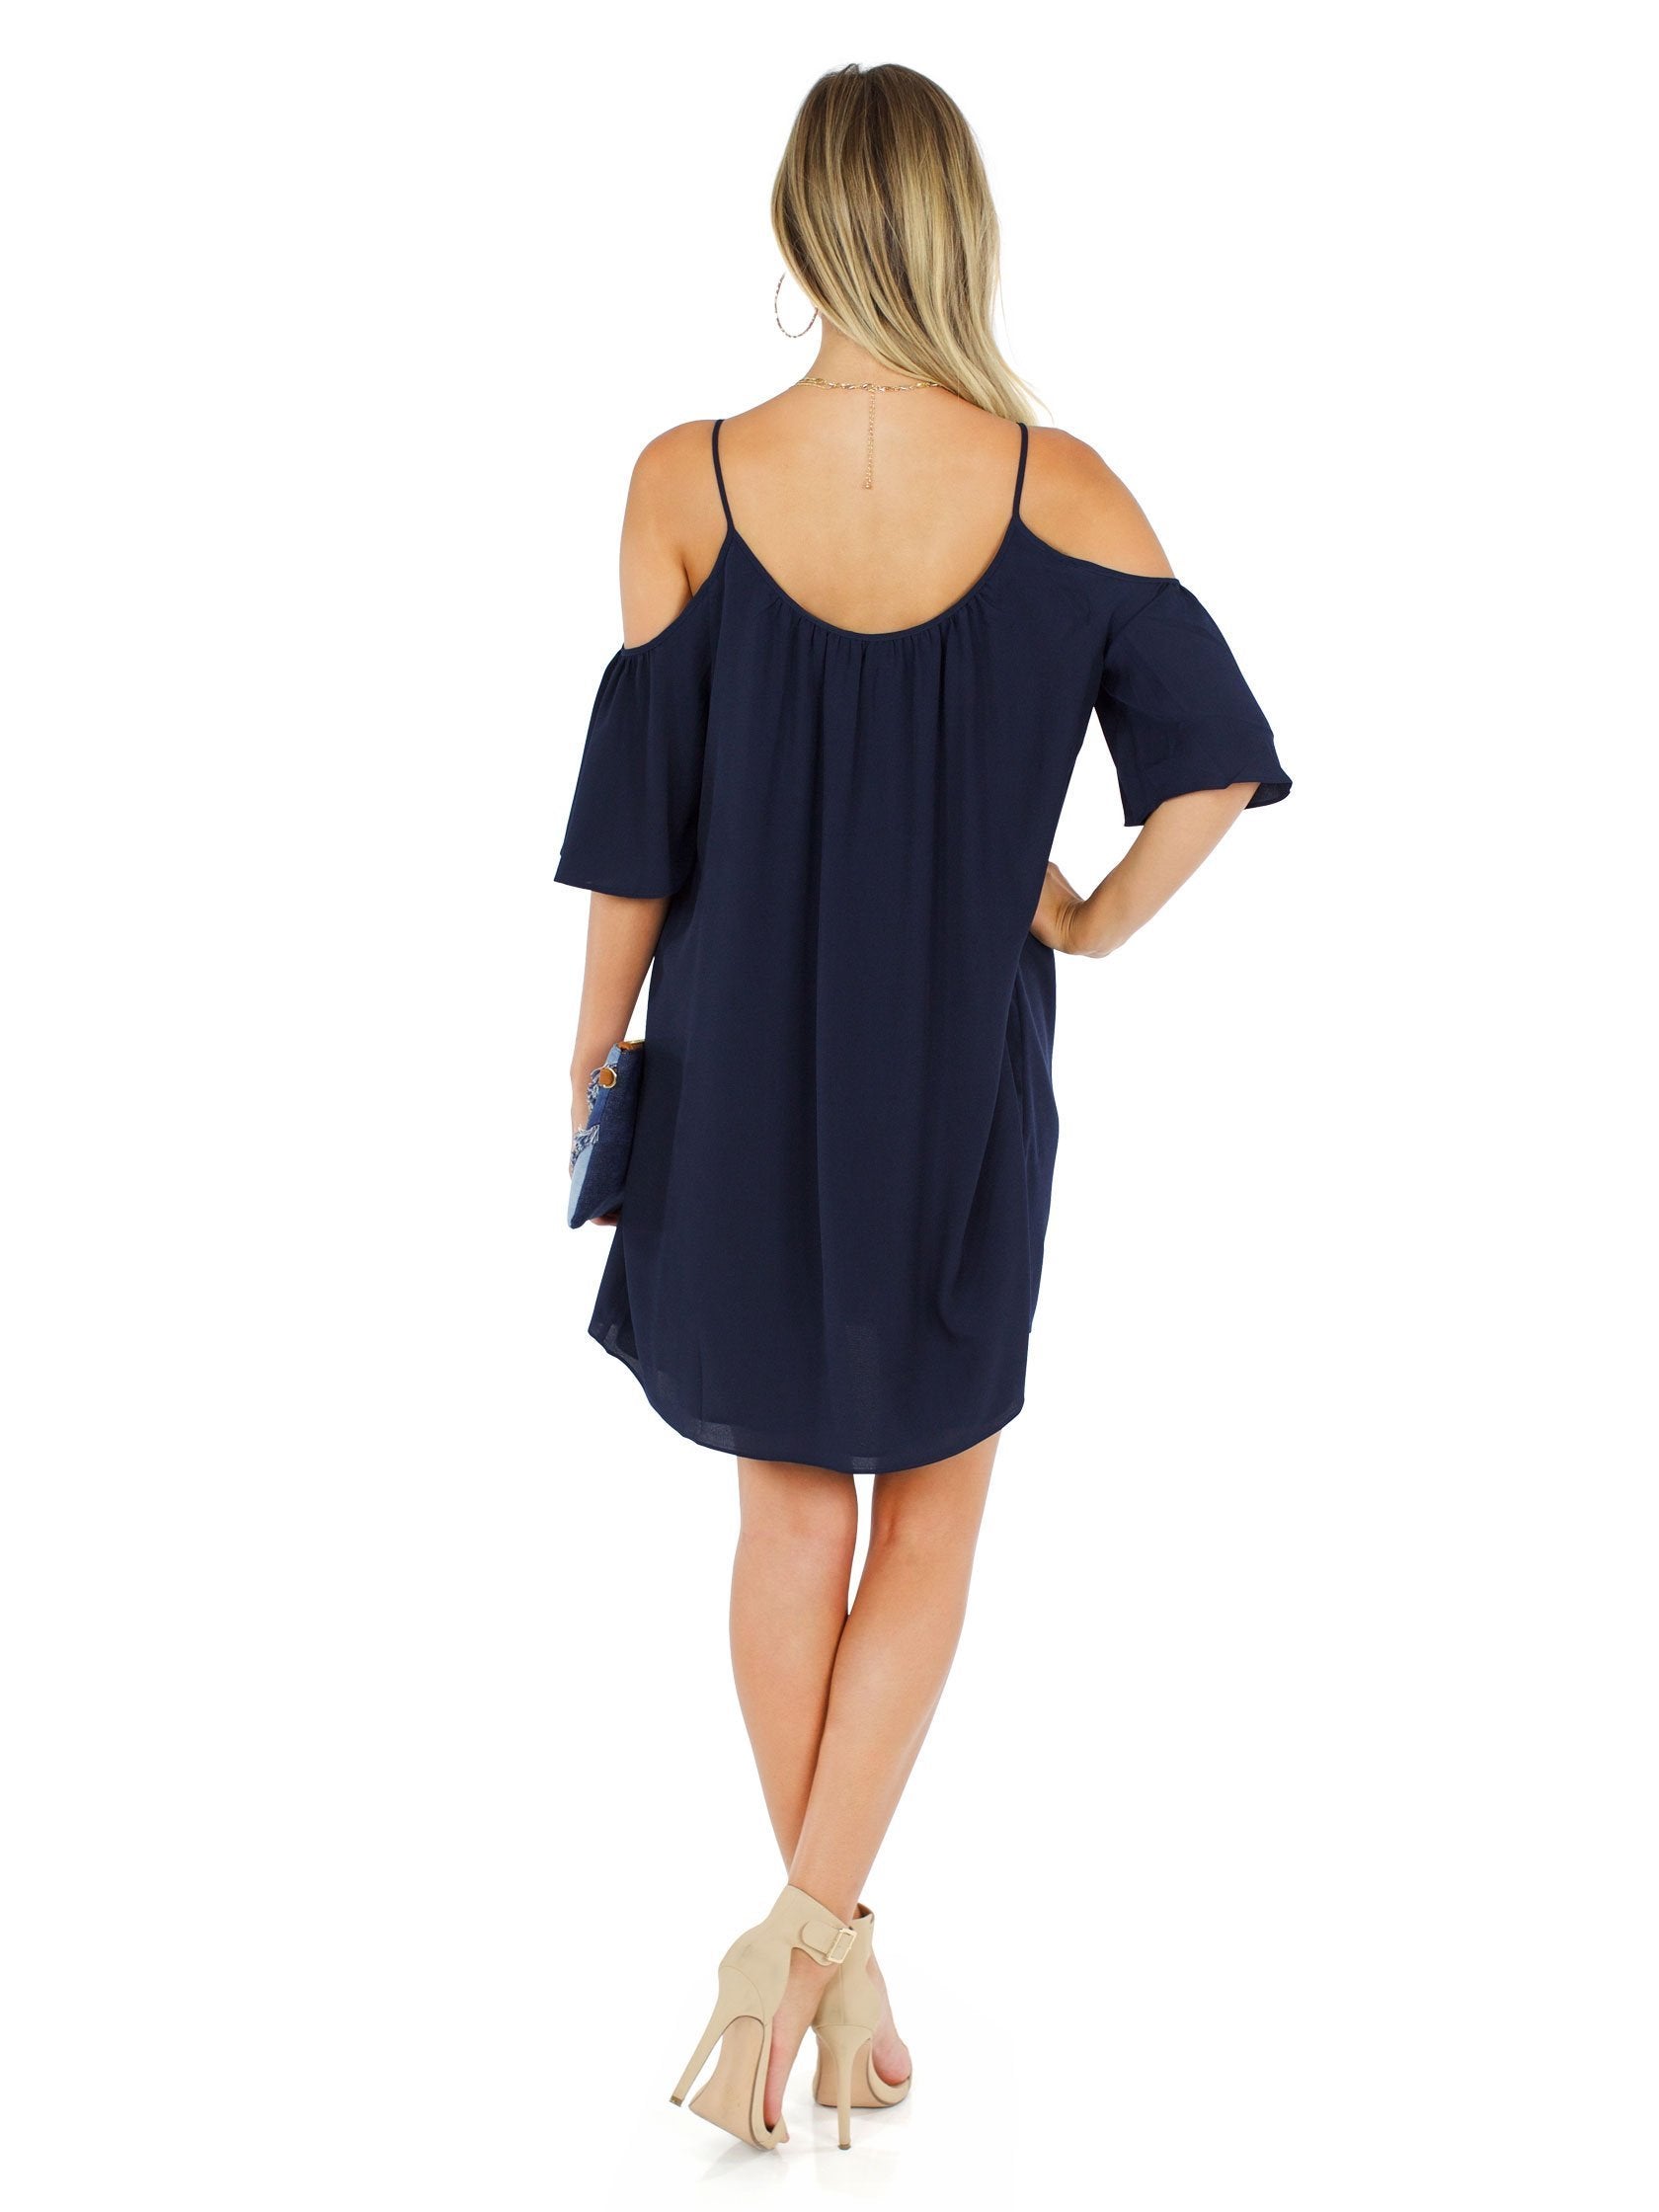 Women wearing a dress rental from French Connection called Polly Plains Cold Shoulder Dress